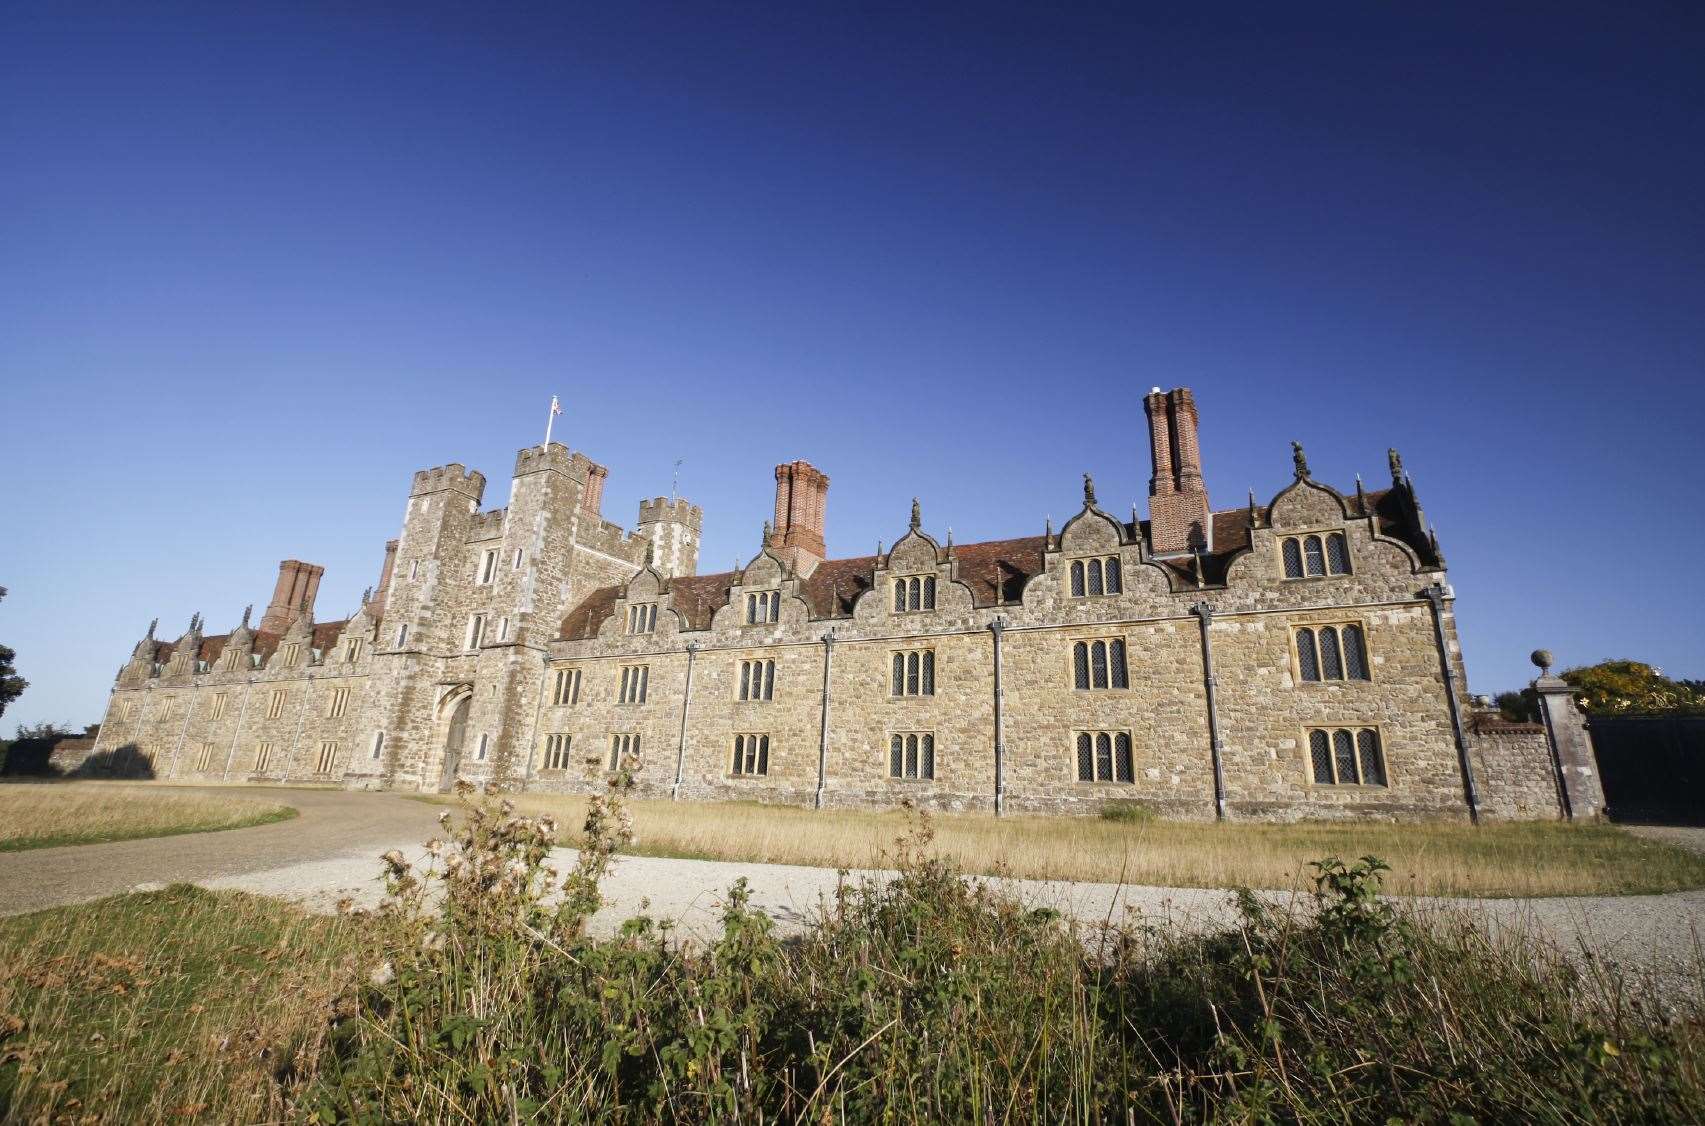 The Sackvilles have lived in Knole for hundreds of years